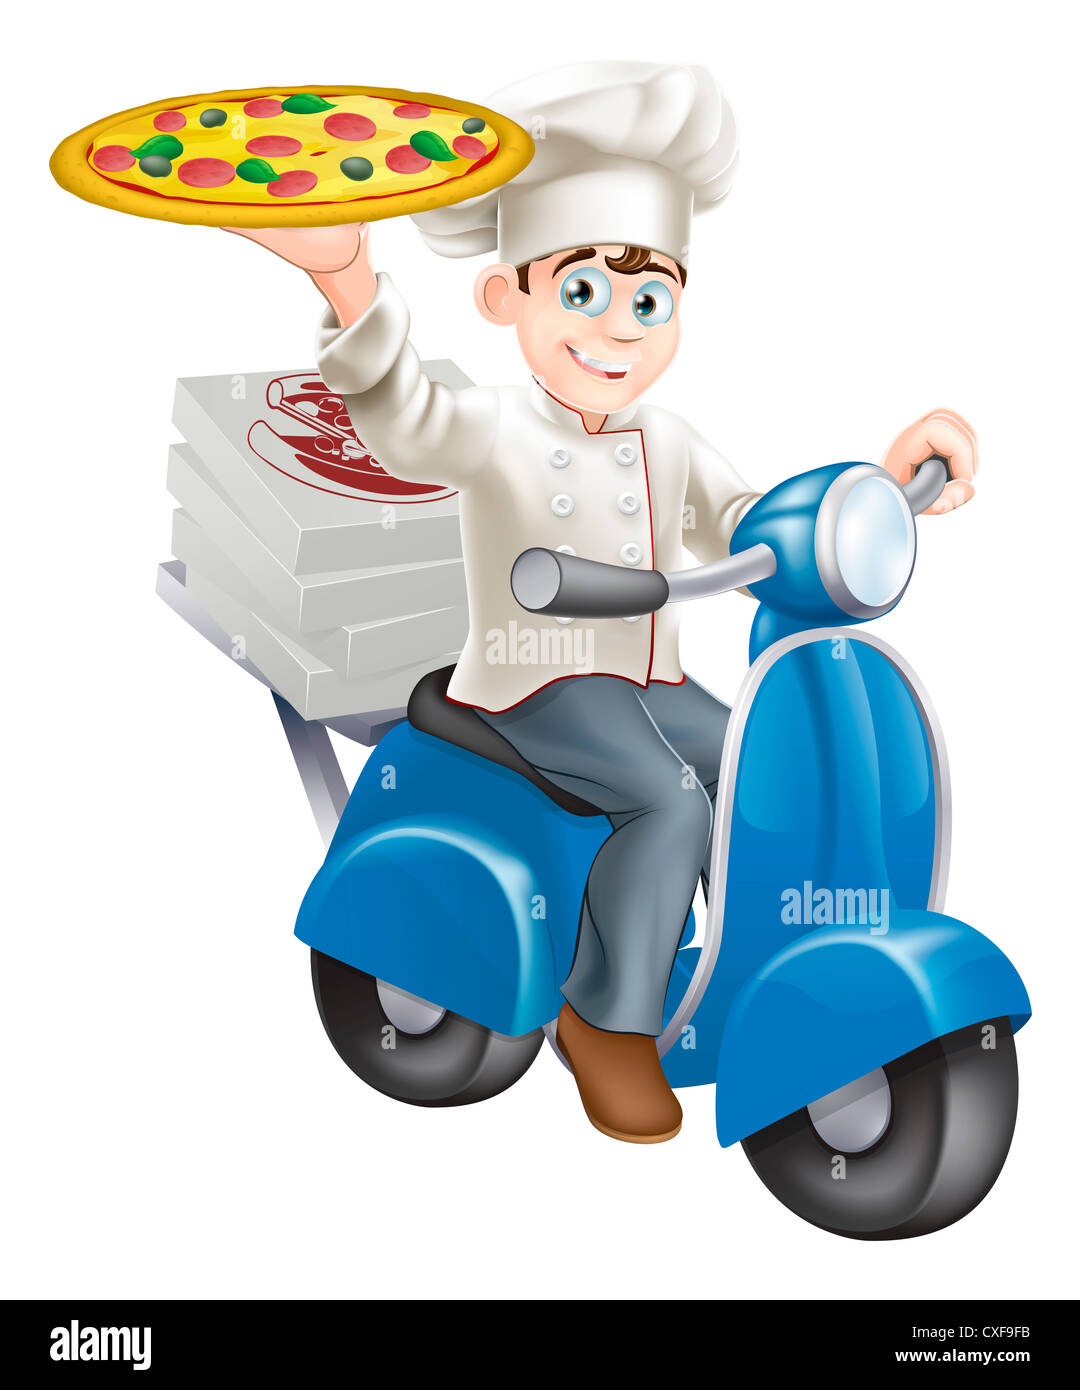 A smartly dressed pizza chef in his chef whites delivering pizza on his moped. Stock Photo